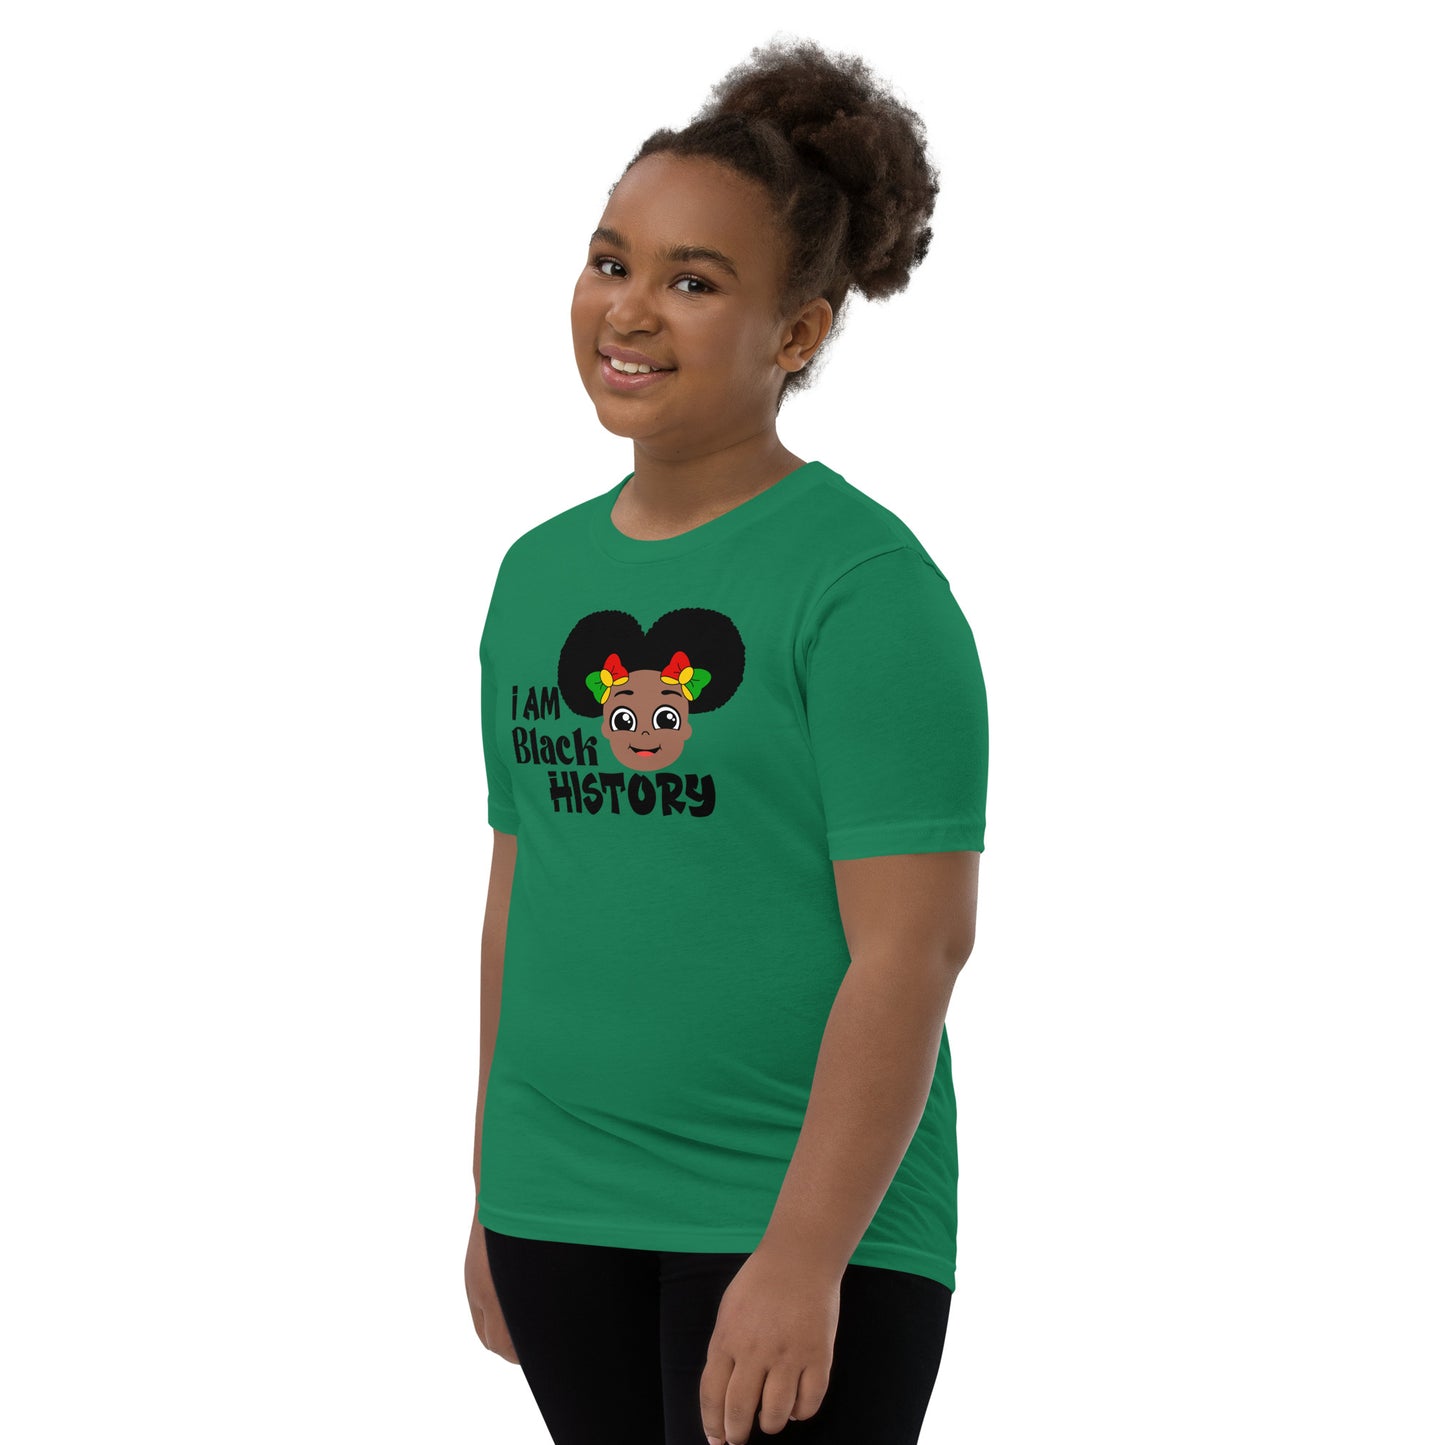 Youth Short Sleeve T-Shirt - I Am Black History (Girl with Afro Puffs)